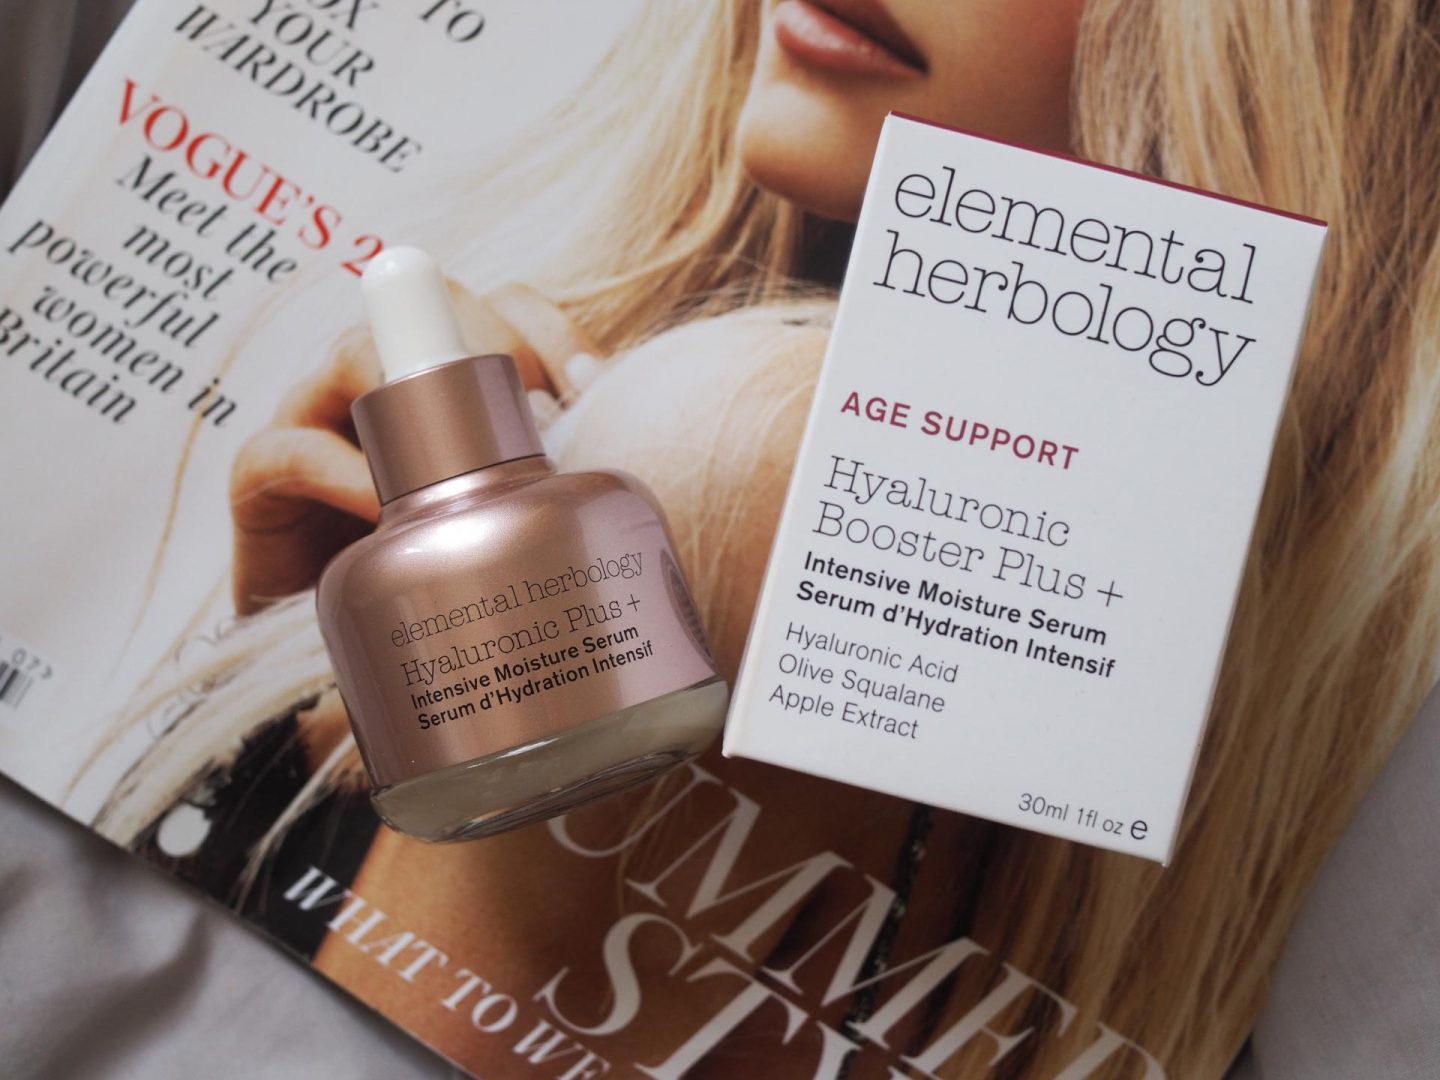 Elemental Herbology Age Support Hyaluronic Booster Plus +